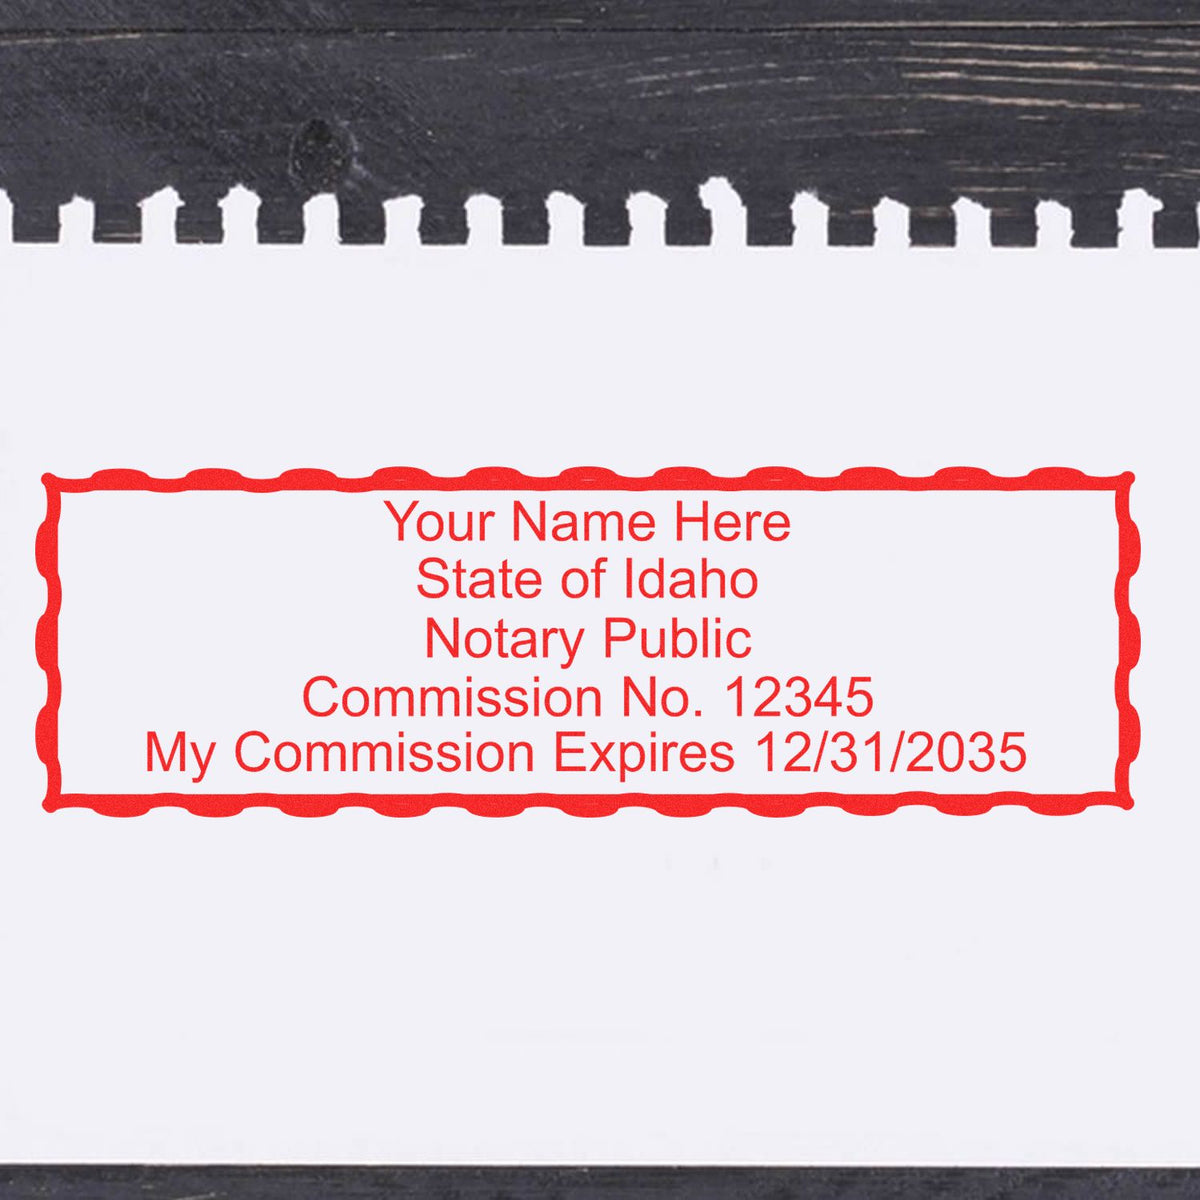 The Self-Inking Rectangular Idaho Notary Stamp stamp impression comes to life with a crisp, detailed photo on paper - showcasing true professional quality.